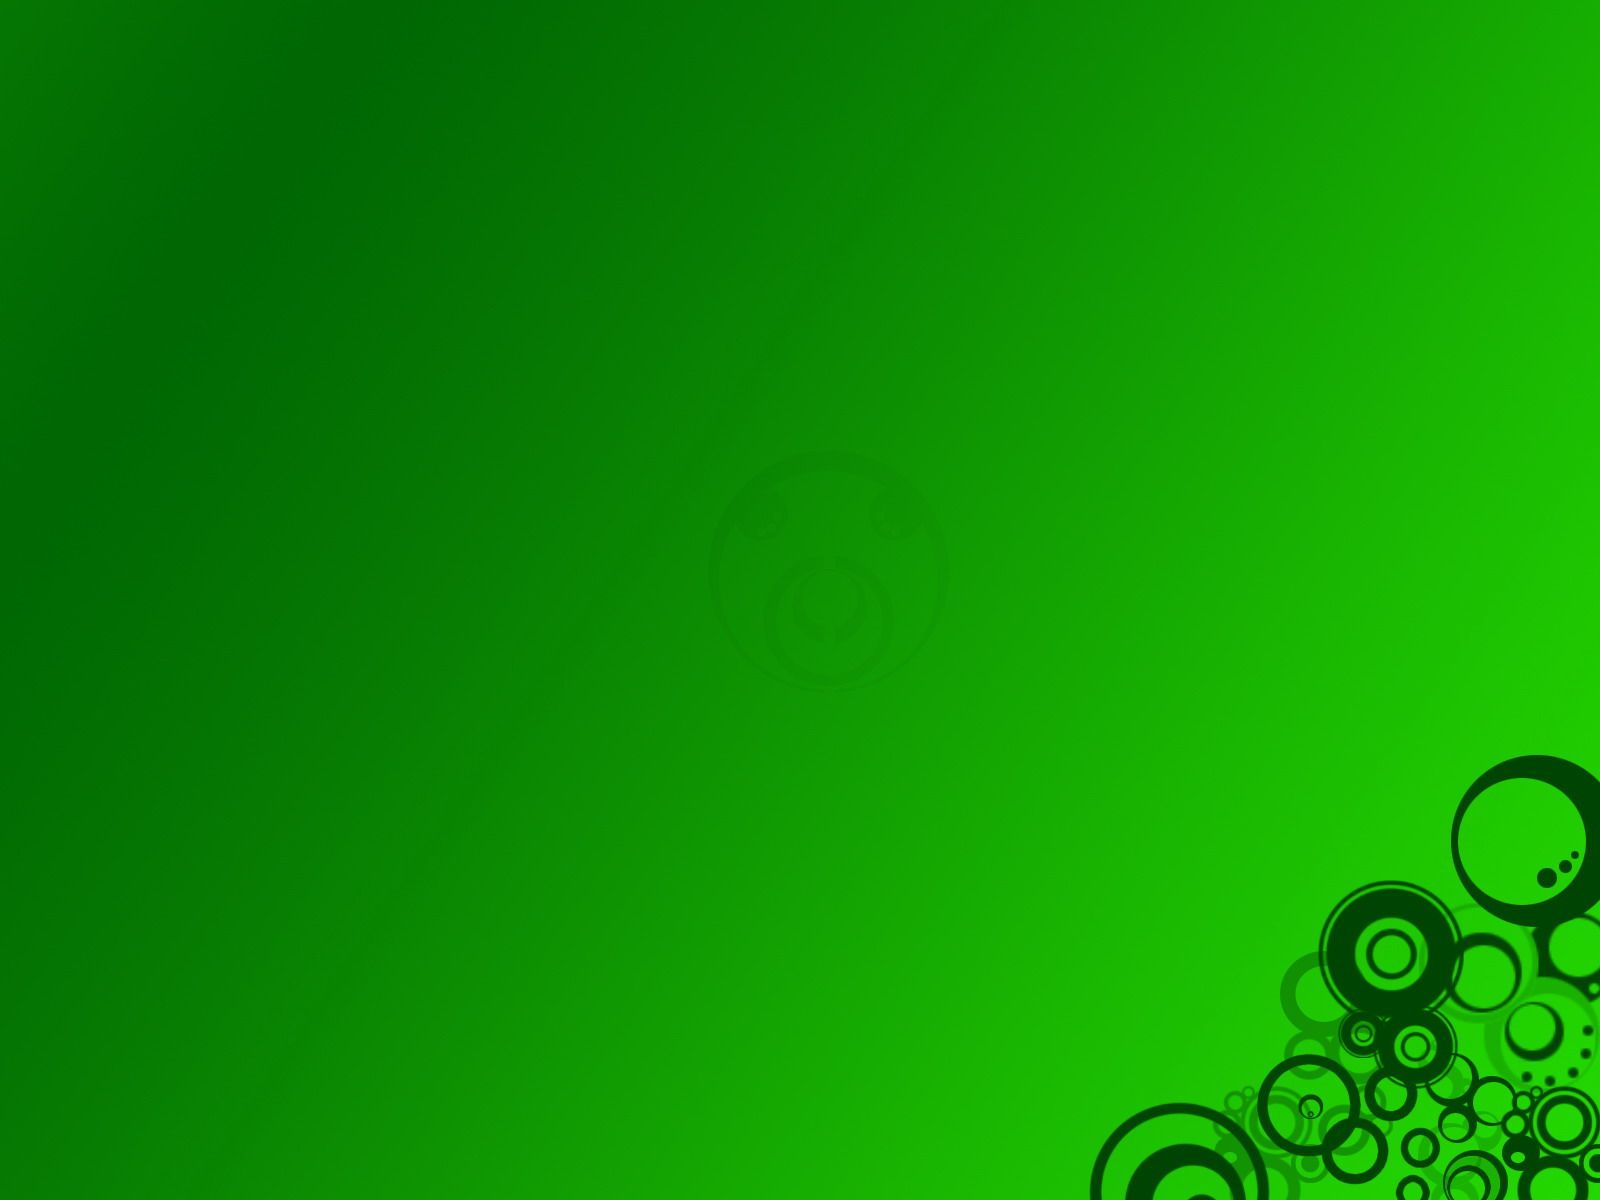 A Place For Free HD Wallpapers | Desktop Wallpapers: Green Wallpapers